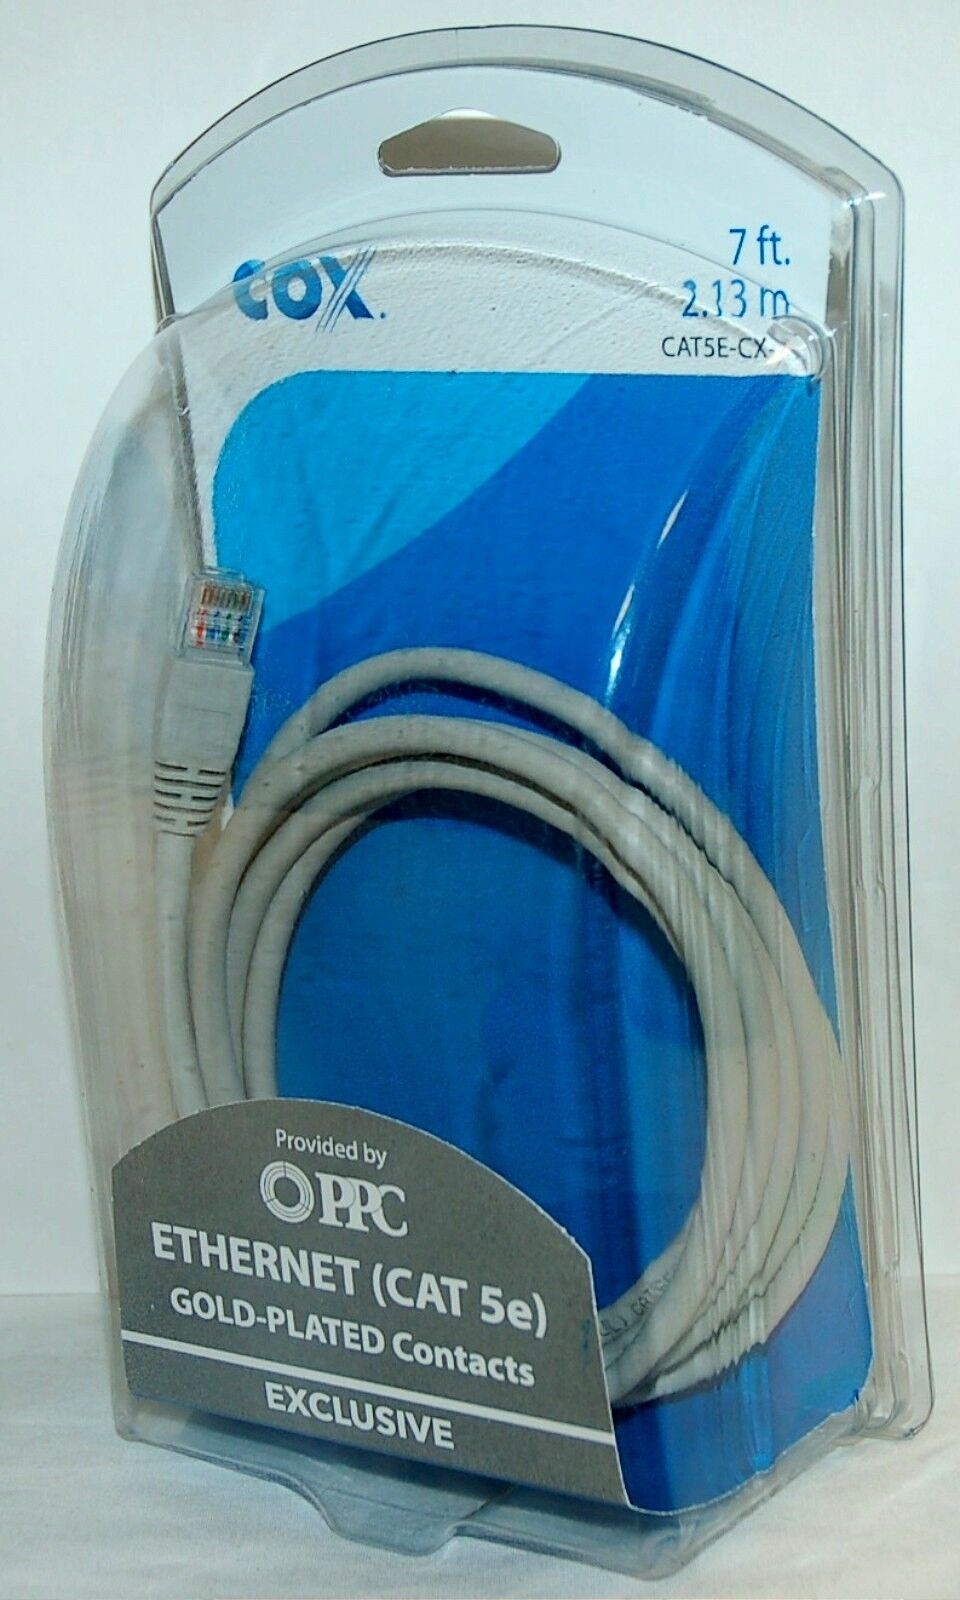 NEW Cox 7' ft 2.13m CAT 5E Ethernet Cable GRAY PC Network Gold Plated Contacts